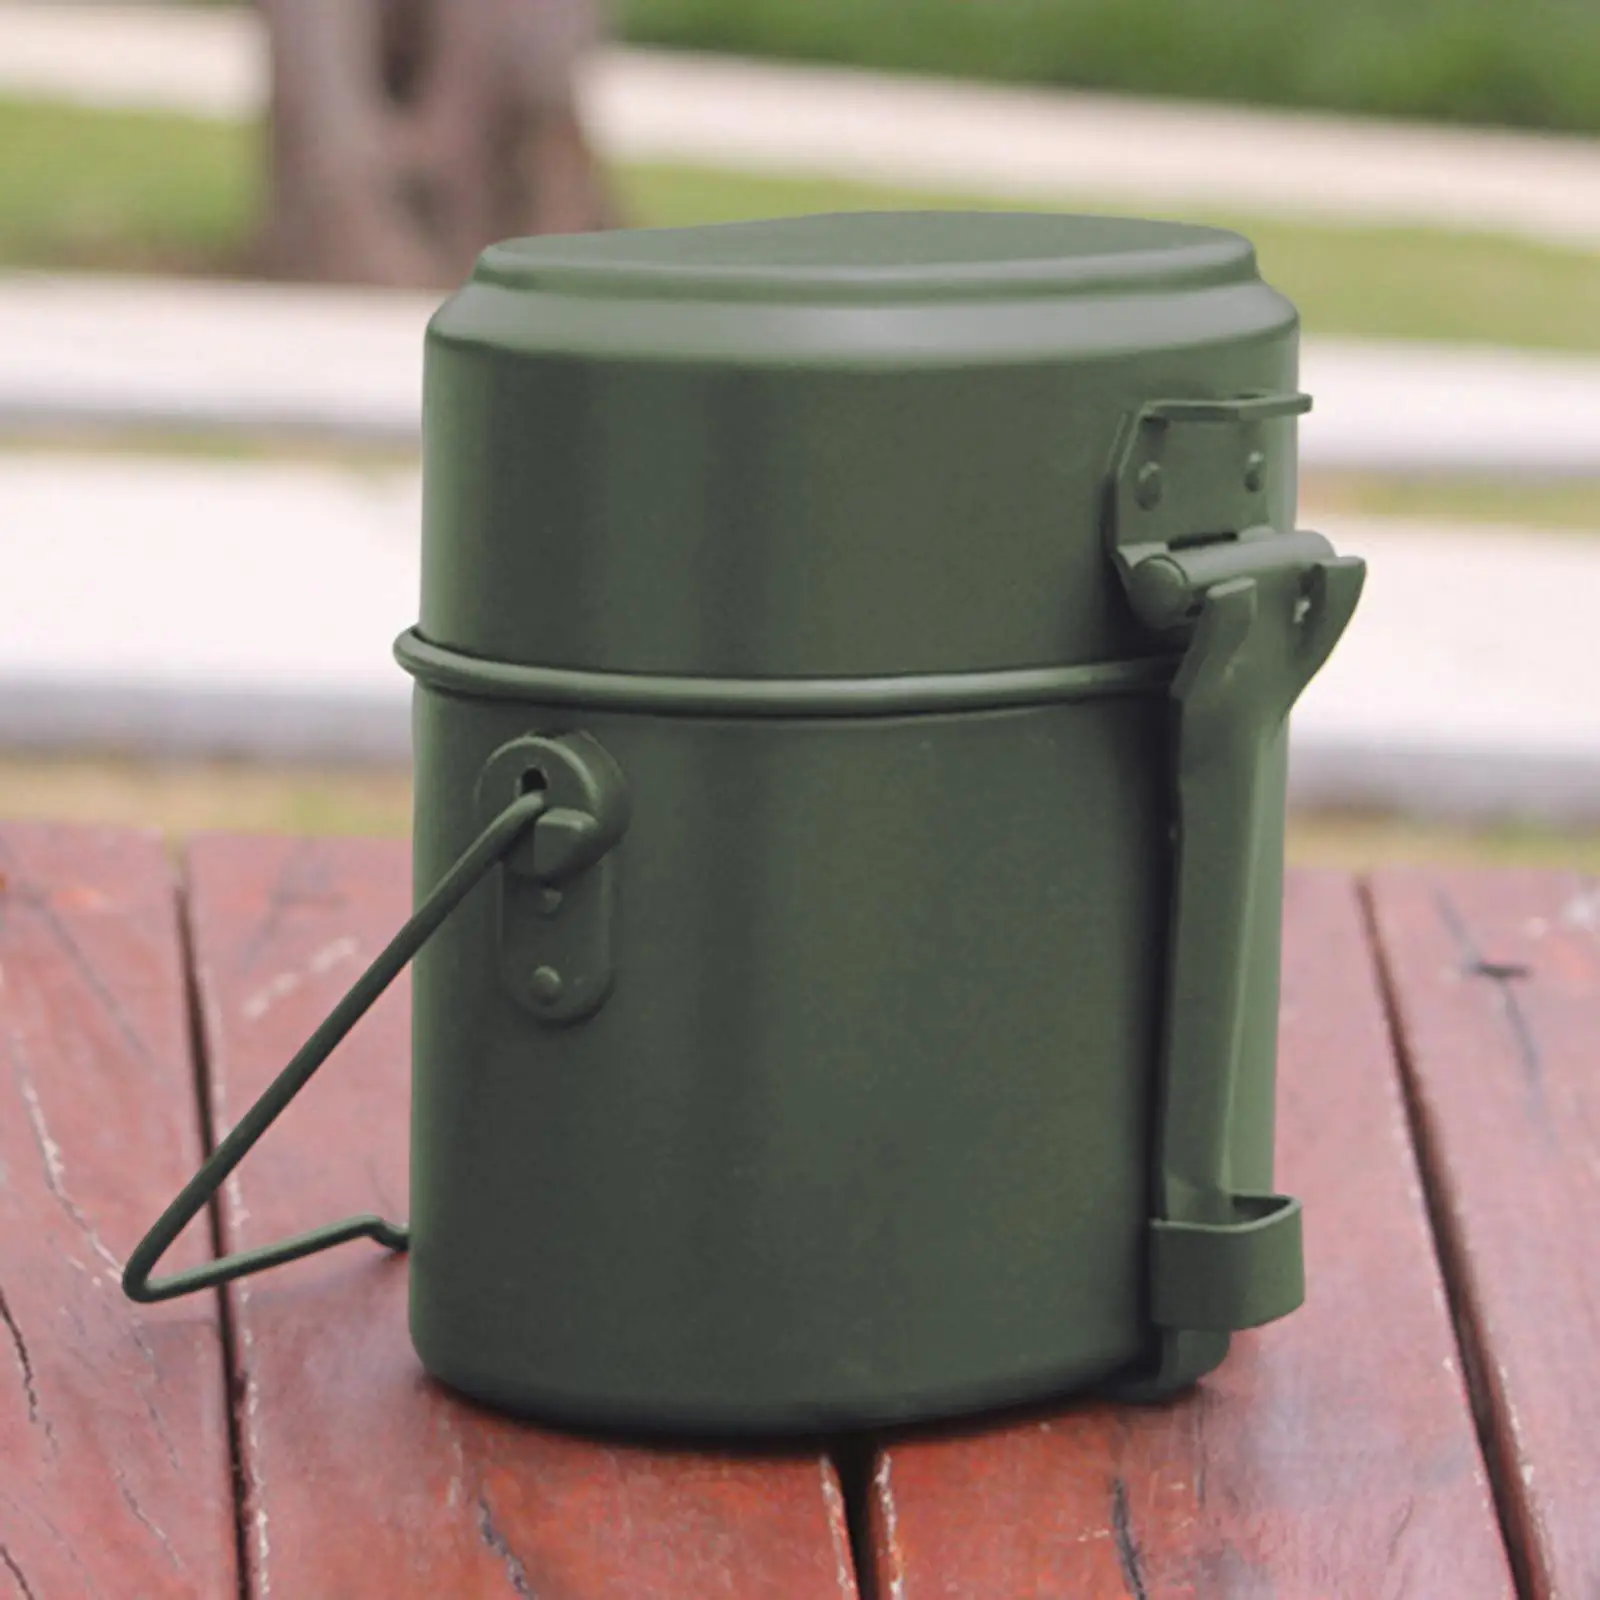 3Pcs/Set  Mess Tin Kit Cookware for Camping Wild Food Container